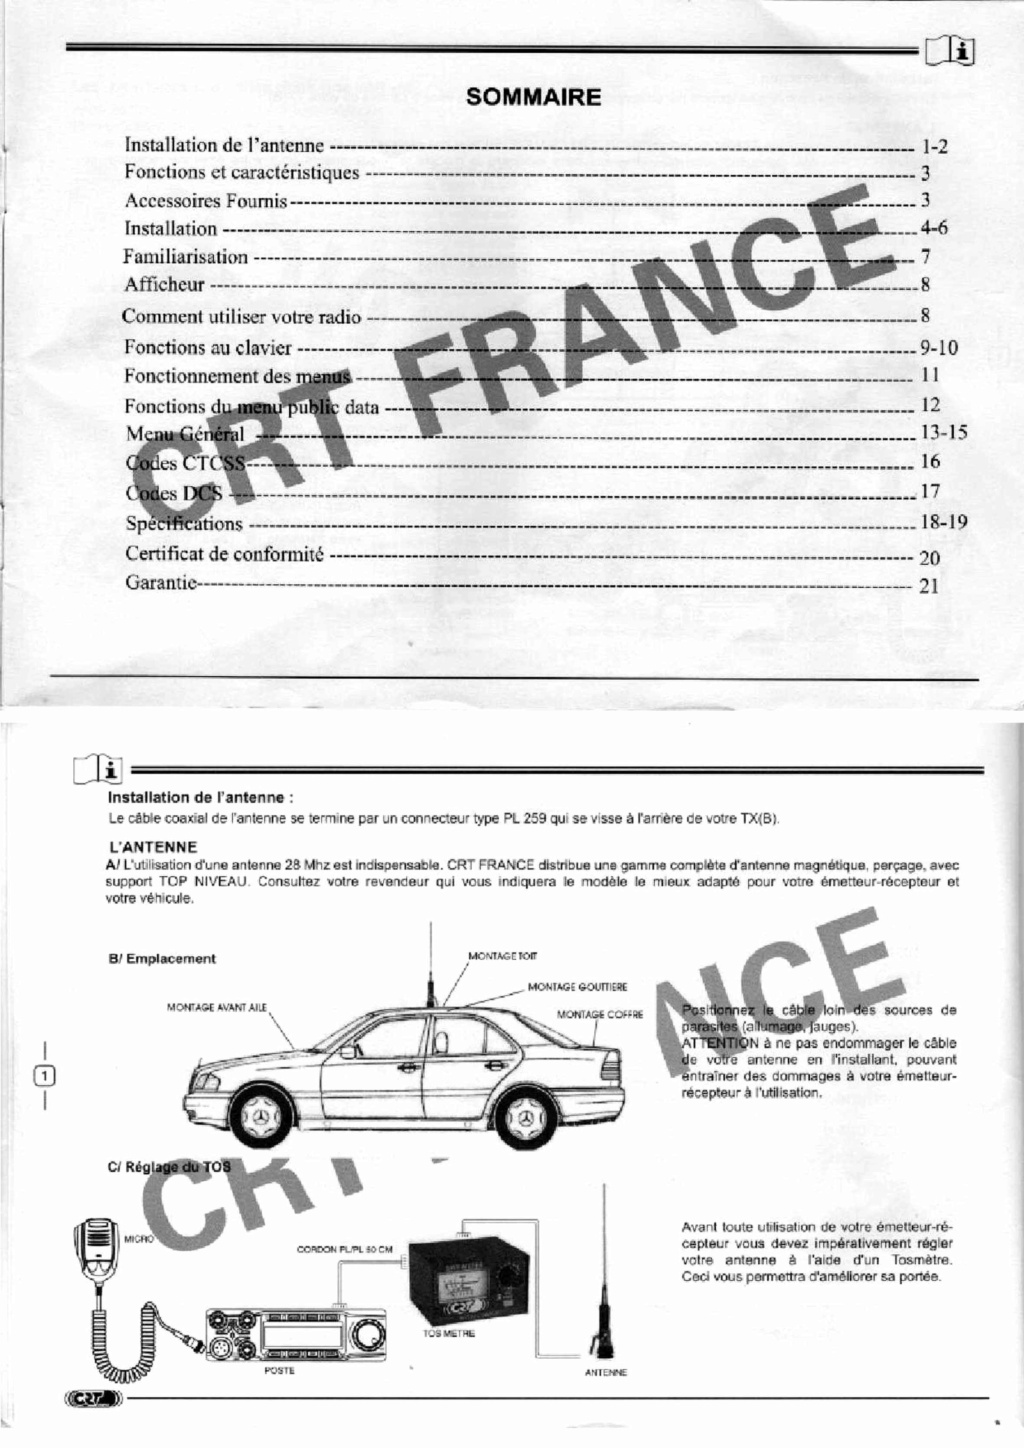 notice - CRT SS 9900 v4 (Mobile) - Page 17 Feuill12